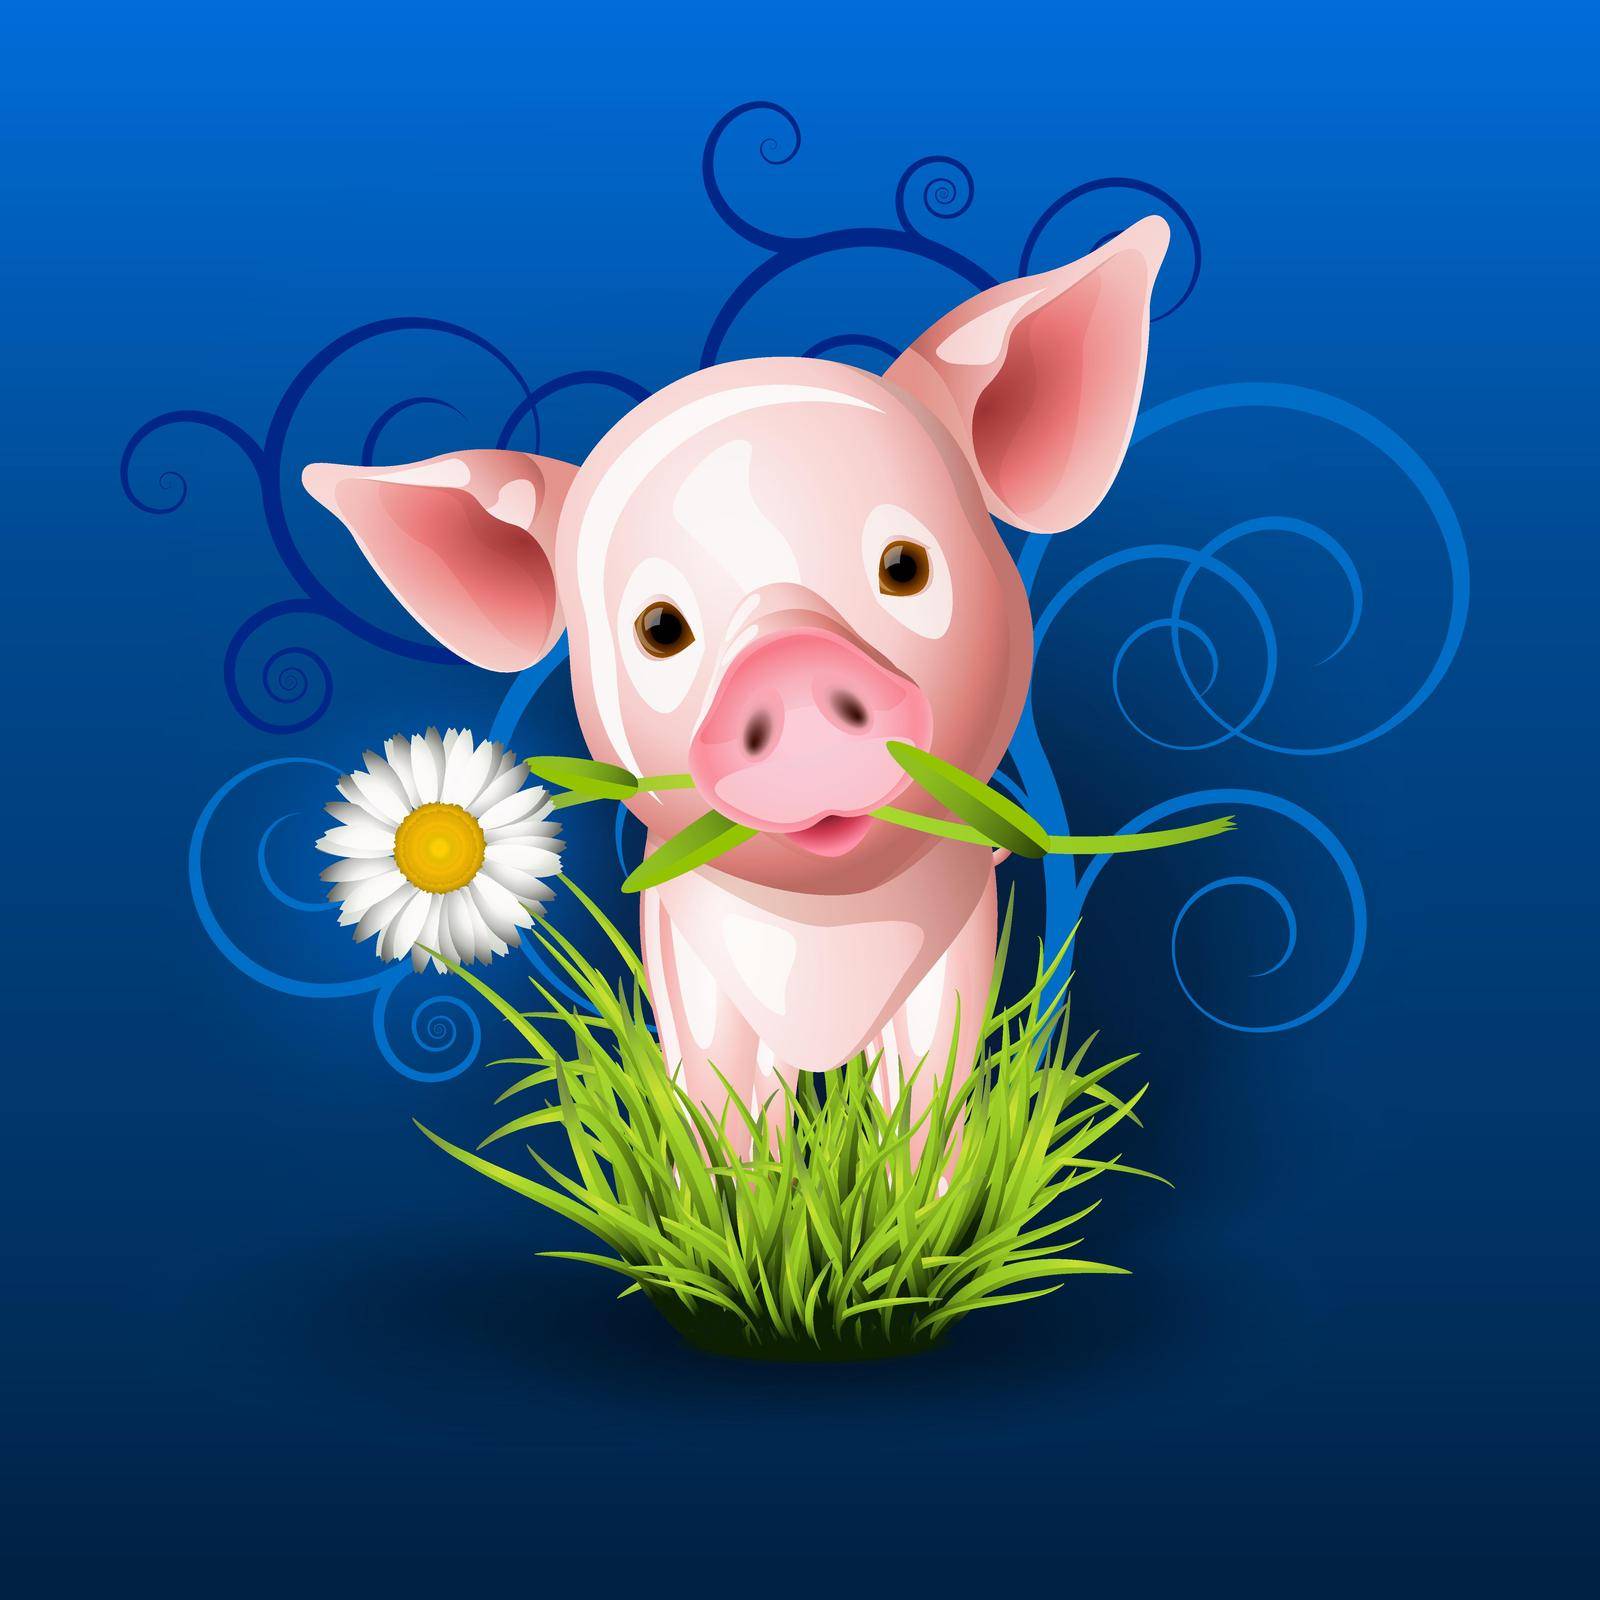 Little pink pig in grass over blue by Tilo